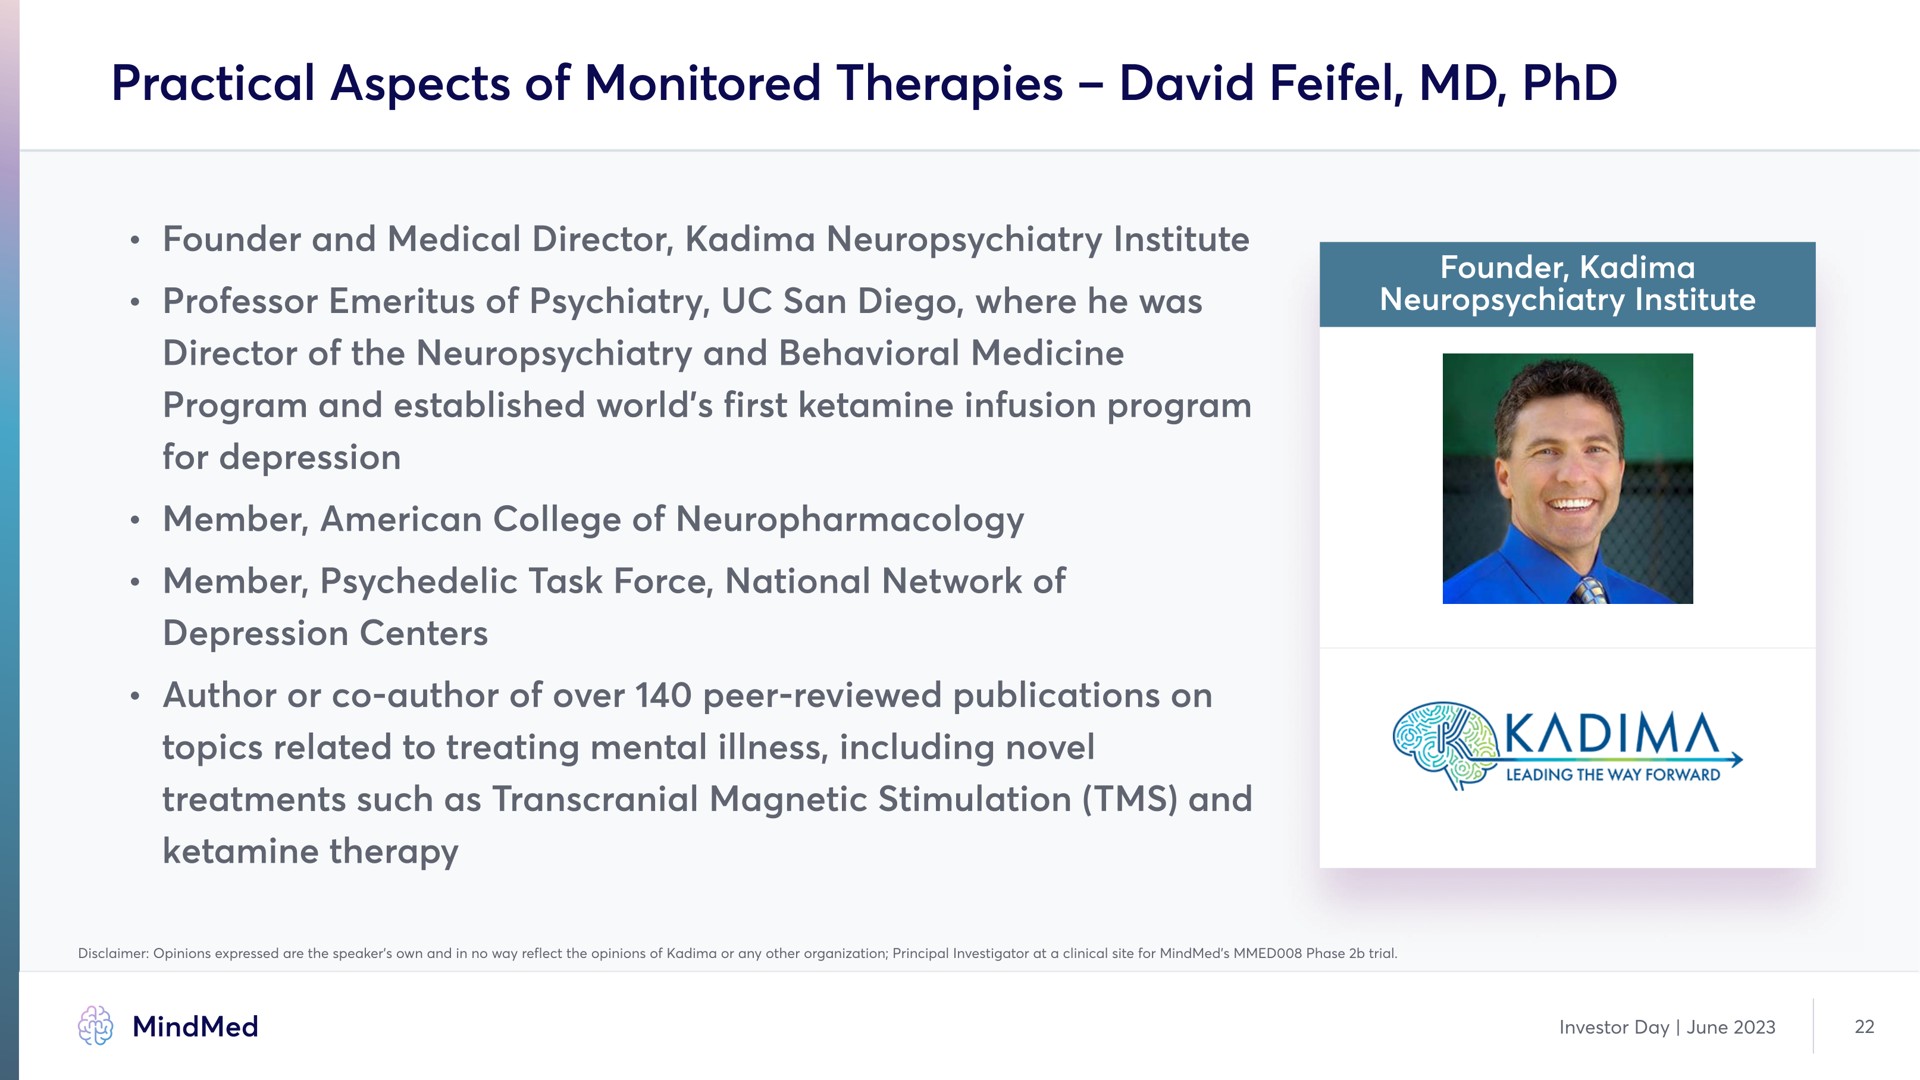 practical aspects of monitored therapies | MindMed